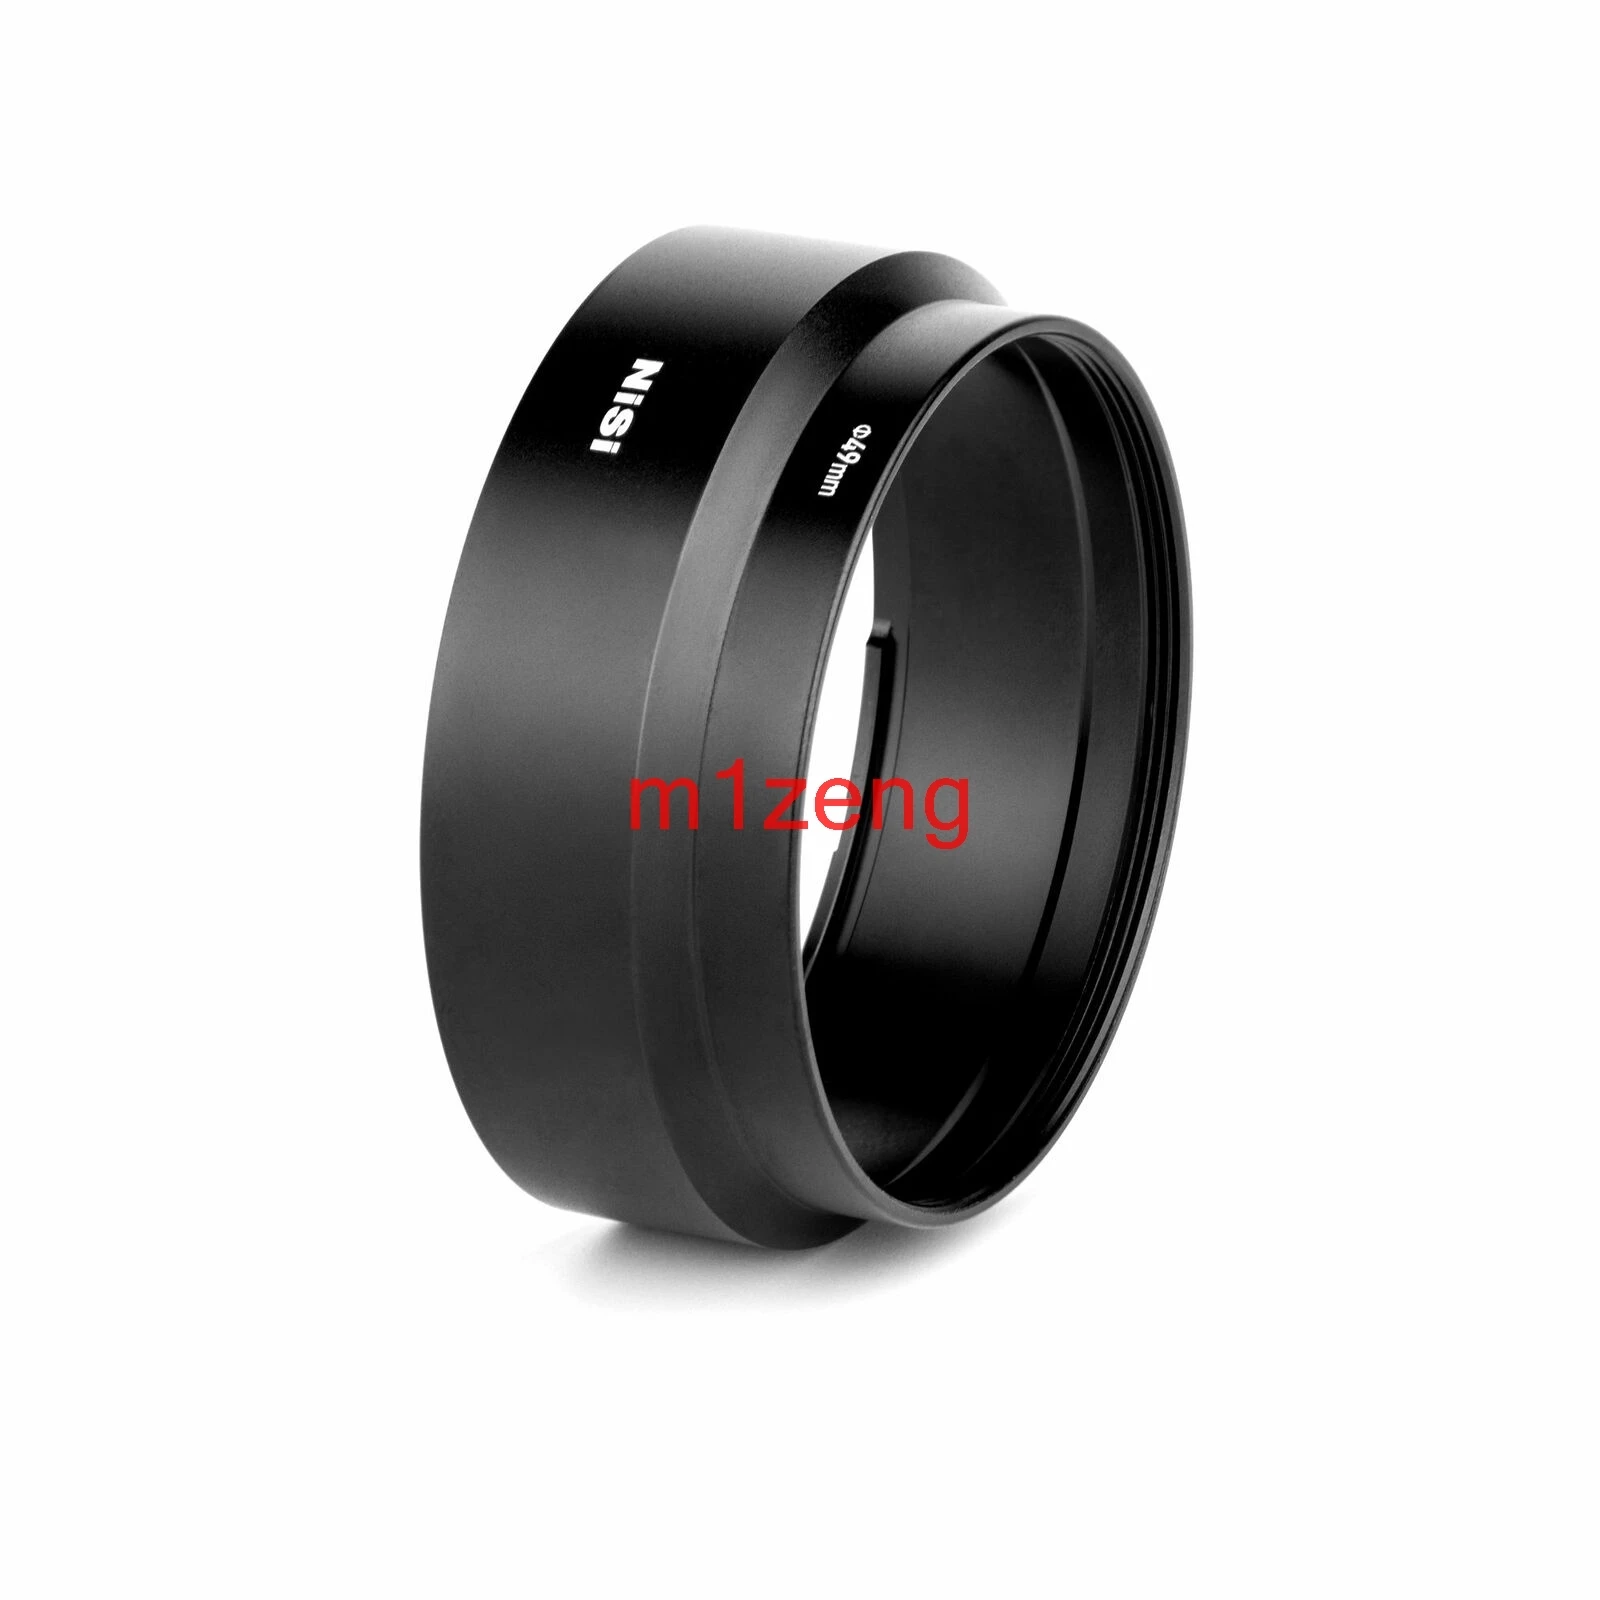 49mm 49mm metal filter mount Lens Adapter Tube Ring for Ricoh GR3 GRIII GR3x GRIIIx camera